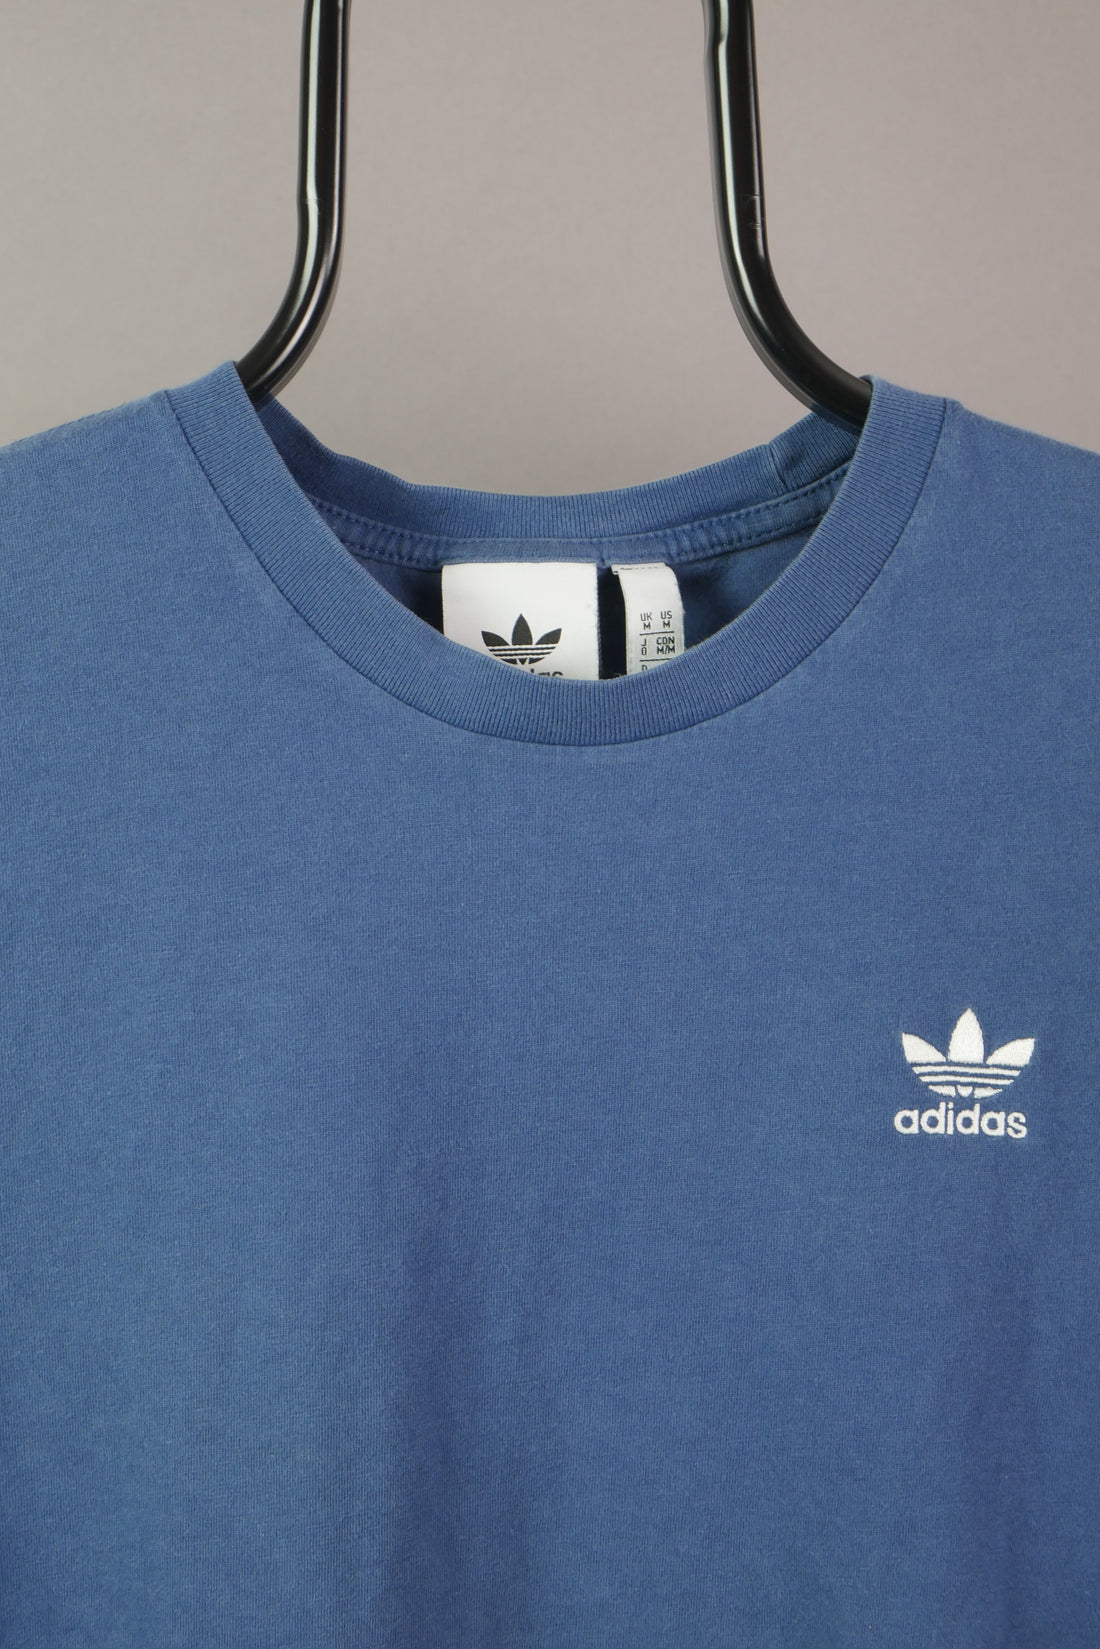 The Adidas Embroidered Logo T-Shirt (M)